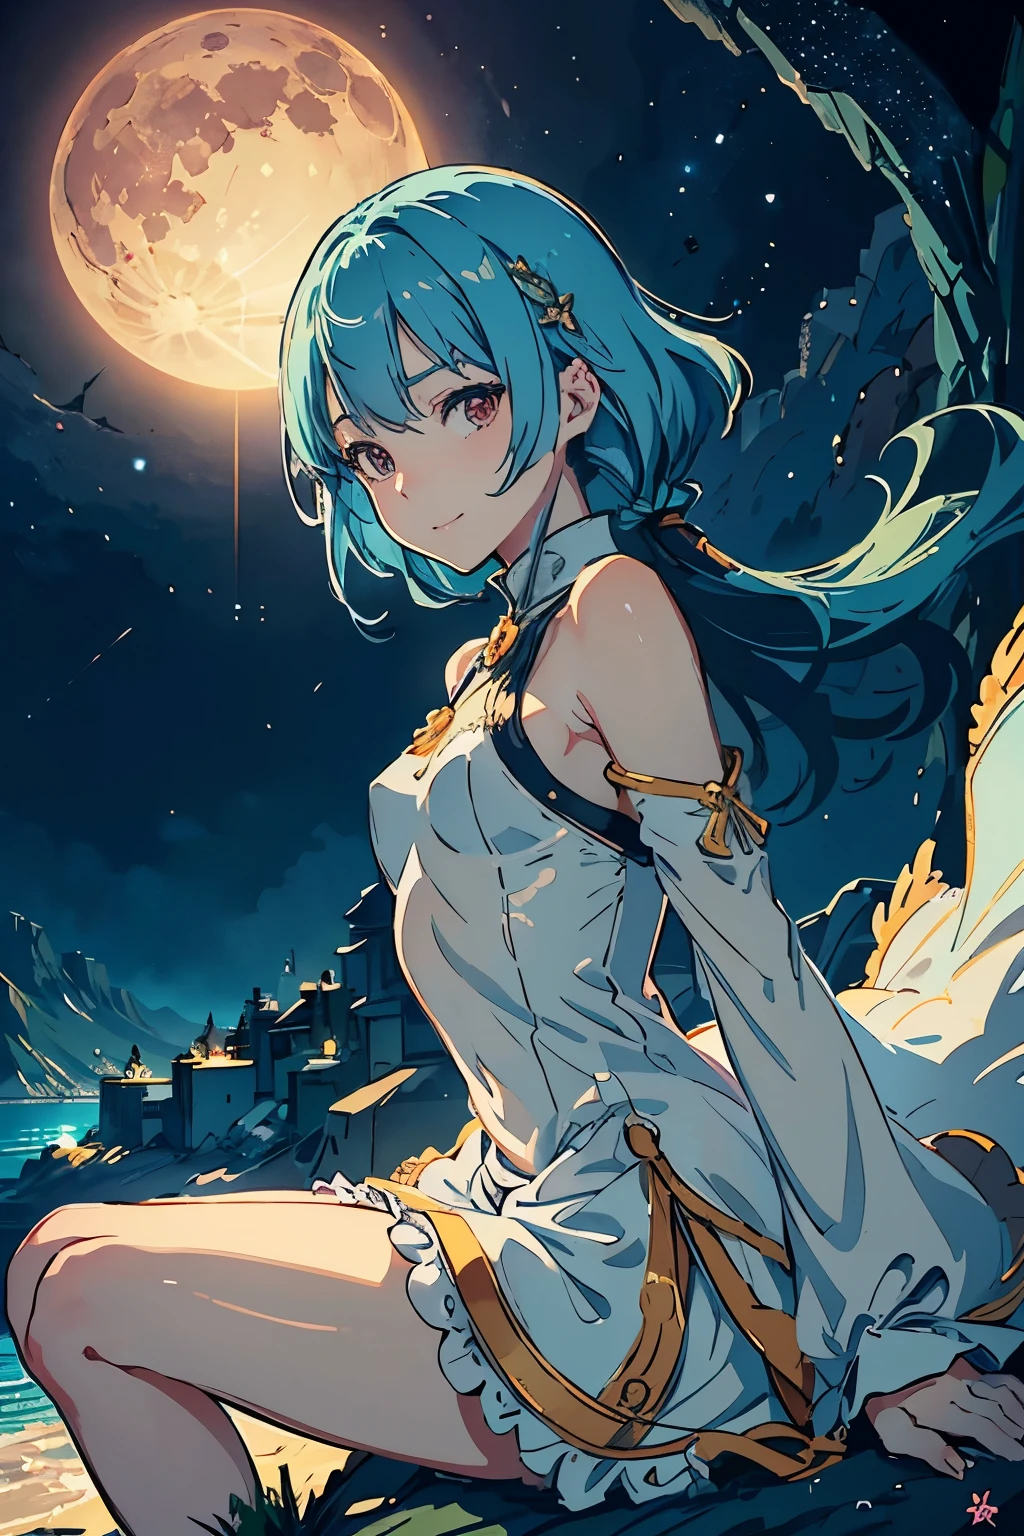 8k wallpaper, masterpiece, movie lighting, medieval setting, Beautiful female knight with long sky blue hair and red eyes walking on a winding road with a smile on her face, sunrise with clear skies background, Masterpiece, two characters, sitting atop a green hill, gazing at a full moon with pink heart-shaped craters, adorable digital painting, cute and detailed digital art, digital anime illustration, captivating depiction of a boy and girl, by the hands of Cyril Roland and Goro Fujita, or Lois van Baarle and Rossdraws, brimming with charm and intricacy, high resolution, sharp focus, soft shading, darling expressions, heartwarming scene, under the star-lit sky, expansive foreground, vibrant palette, enchanting art style. ((masutepiece)),((Best Quality)),Ultra-detailed,illustratio,explicit,Beautiful body,Beautiful nose,Beautiful character design,Perfect eyes,Perfect face,Wallpaper,超A high resolution, 4K,Photography,(Beautiful,Small breasts:1.5),(Beautiful face:1.2),Beautiful legs, Mayu Sakuma, Shiny skin,anime screen cap,official style, 1girl in, Solo, arrogant smile, Sunnyday,Daytime, Looking at Viewer, POV, Detailed eyes, Complex hairstyle、drooing eyes、princess dress, wide eyed, Crazy smile, Empty eyes, POV cowgirl, Sweat, flying sweatdrops,



